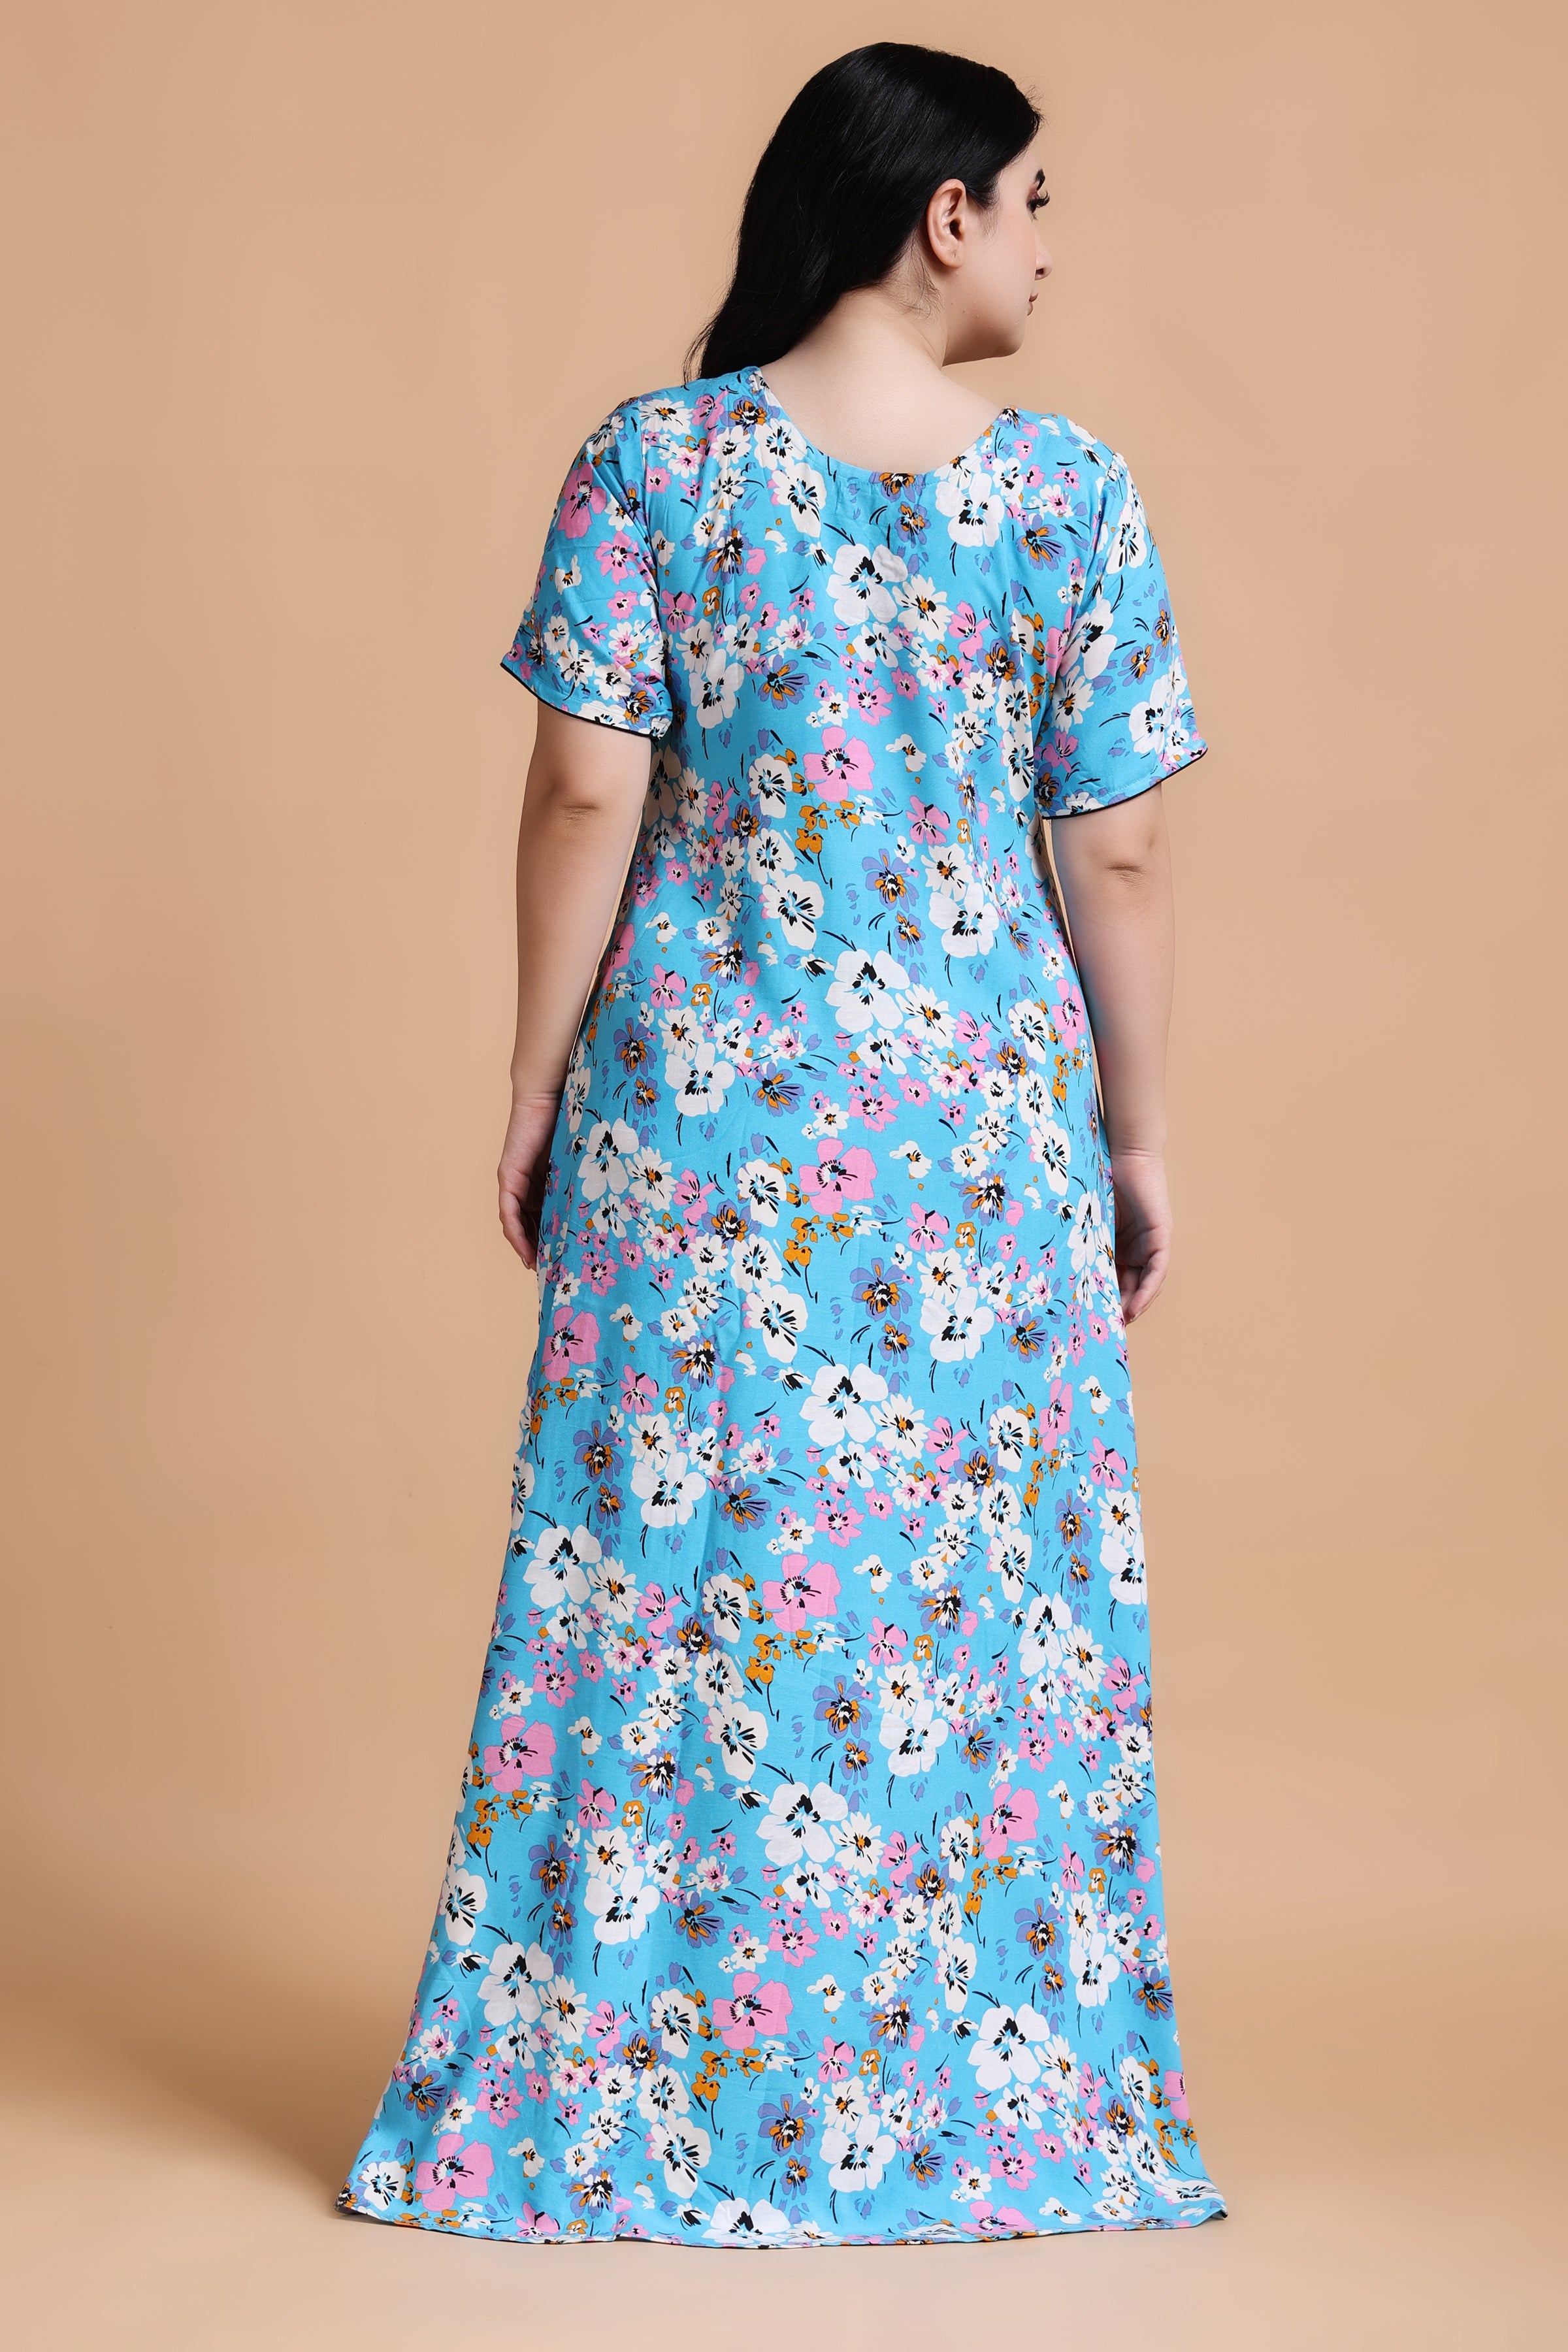 Summer Special Nighty Gown Vol 494 Hosiery Cotton Plus Size Night Wear Gowns  For Woman At